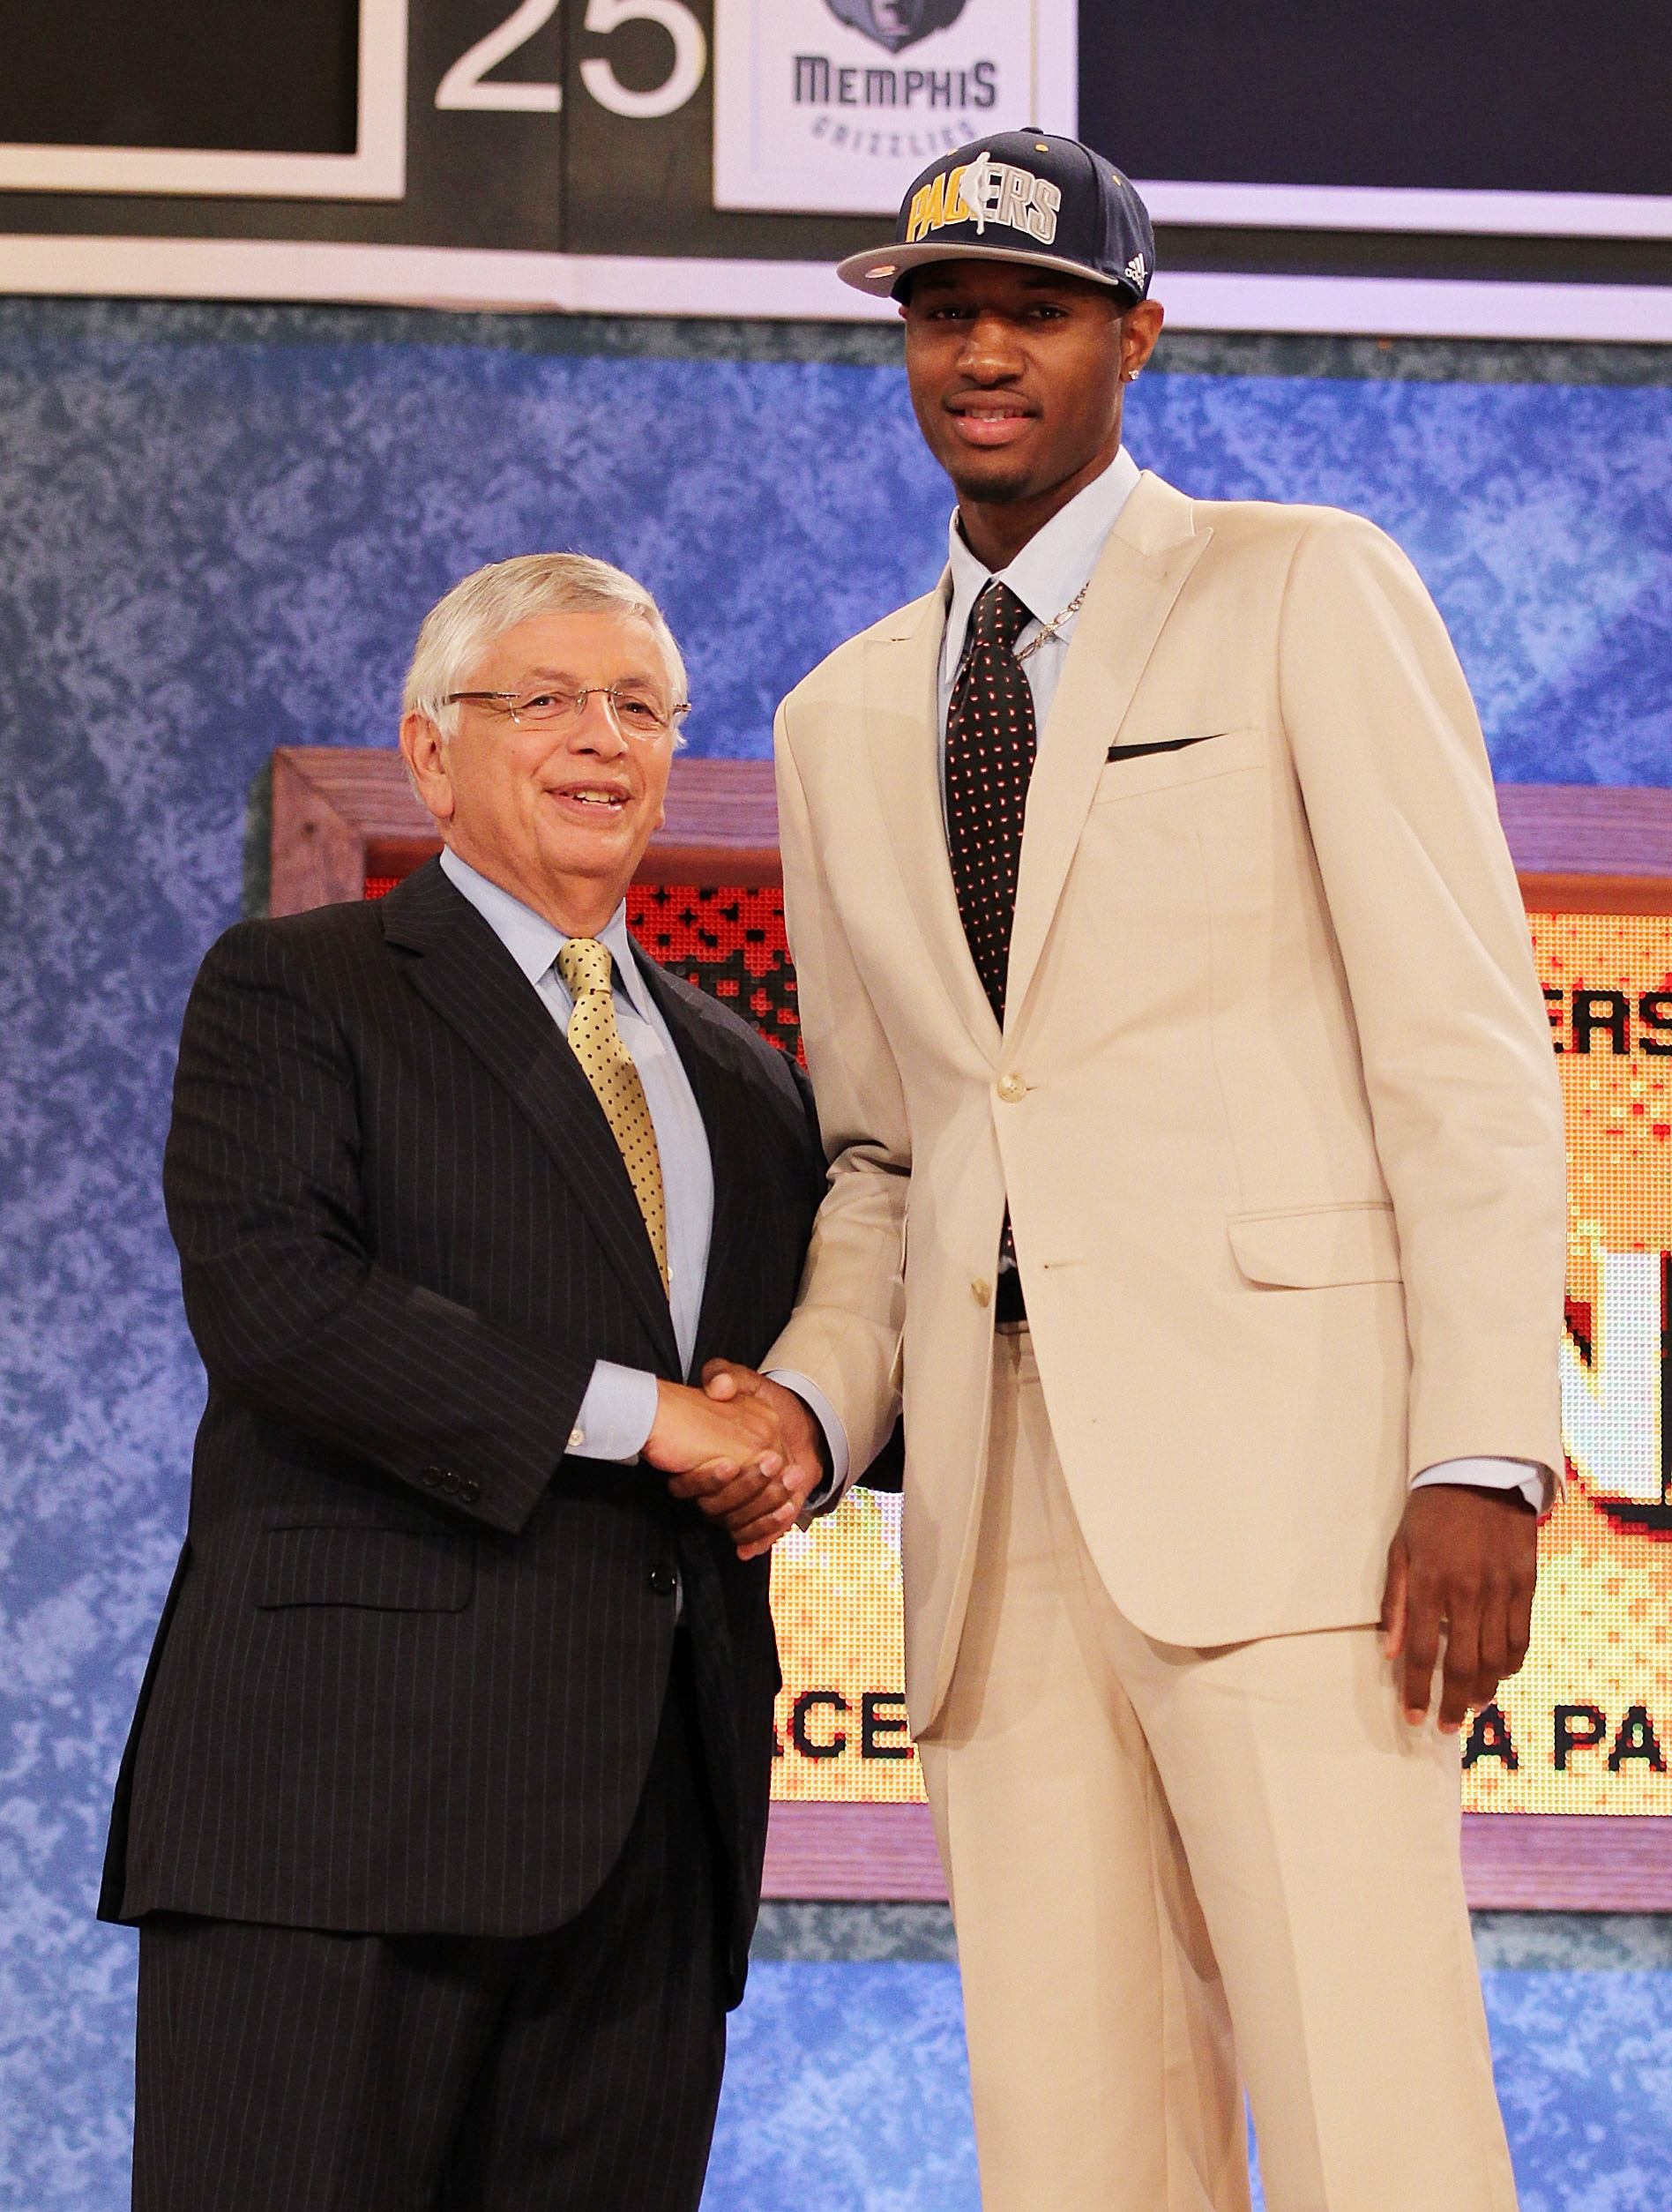 NEW YORK - JUNE 24:  Paul George stands with NBA Commisioner David Stern after being drafted tenth by The Indiana Pacers at Madison Square Garden on June 24, 2010 in New York City.  NOTE TO USER: User expressly acknowledges and agrees that, by downloading